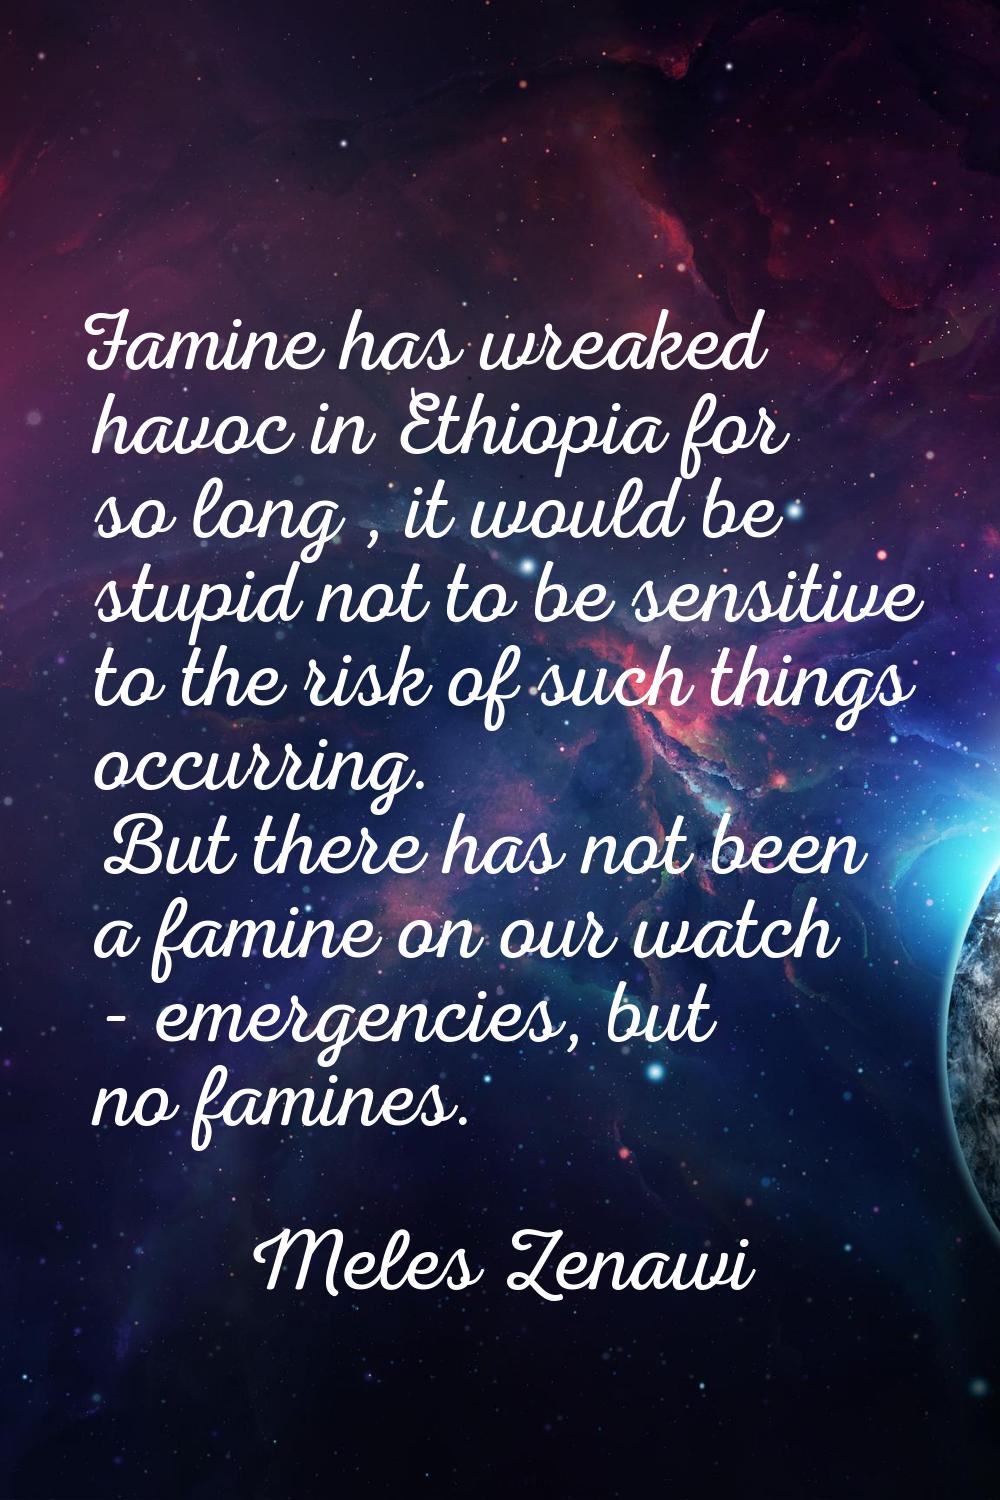 Famine has wreaked havoc in Ethiopia for so long , it would be stupid not to be sensitive to the ri